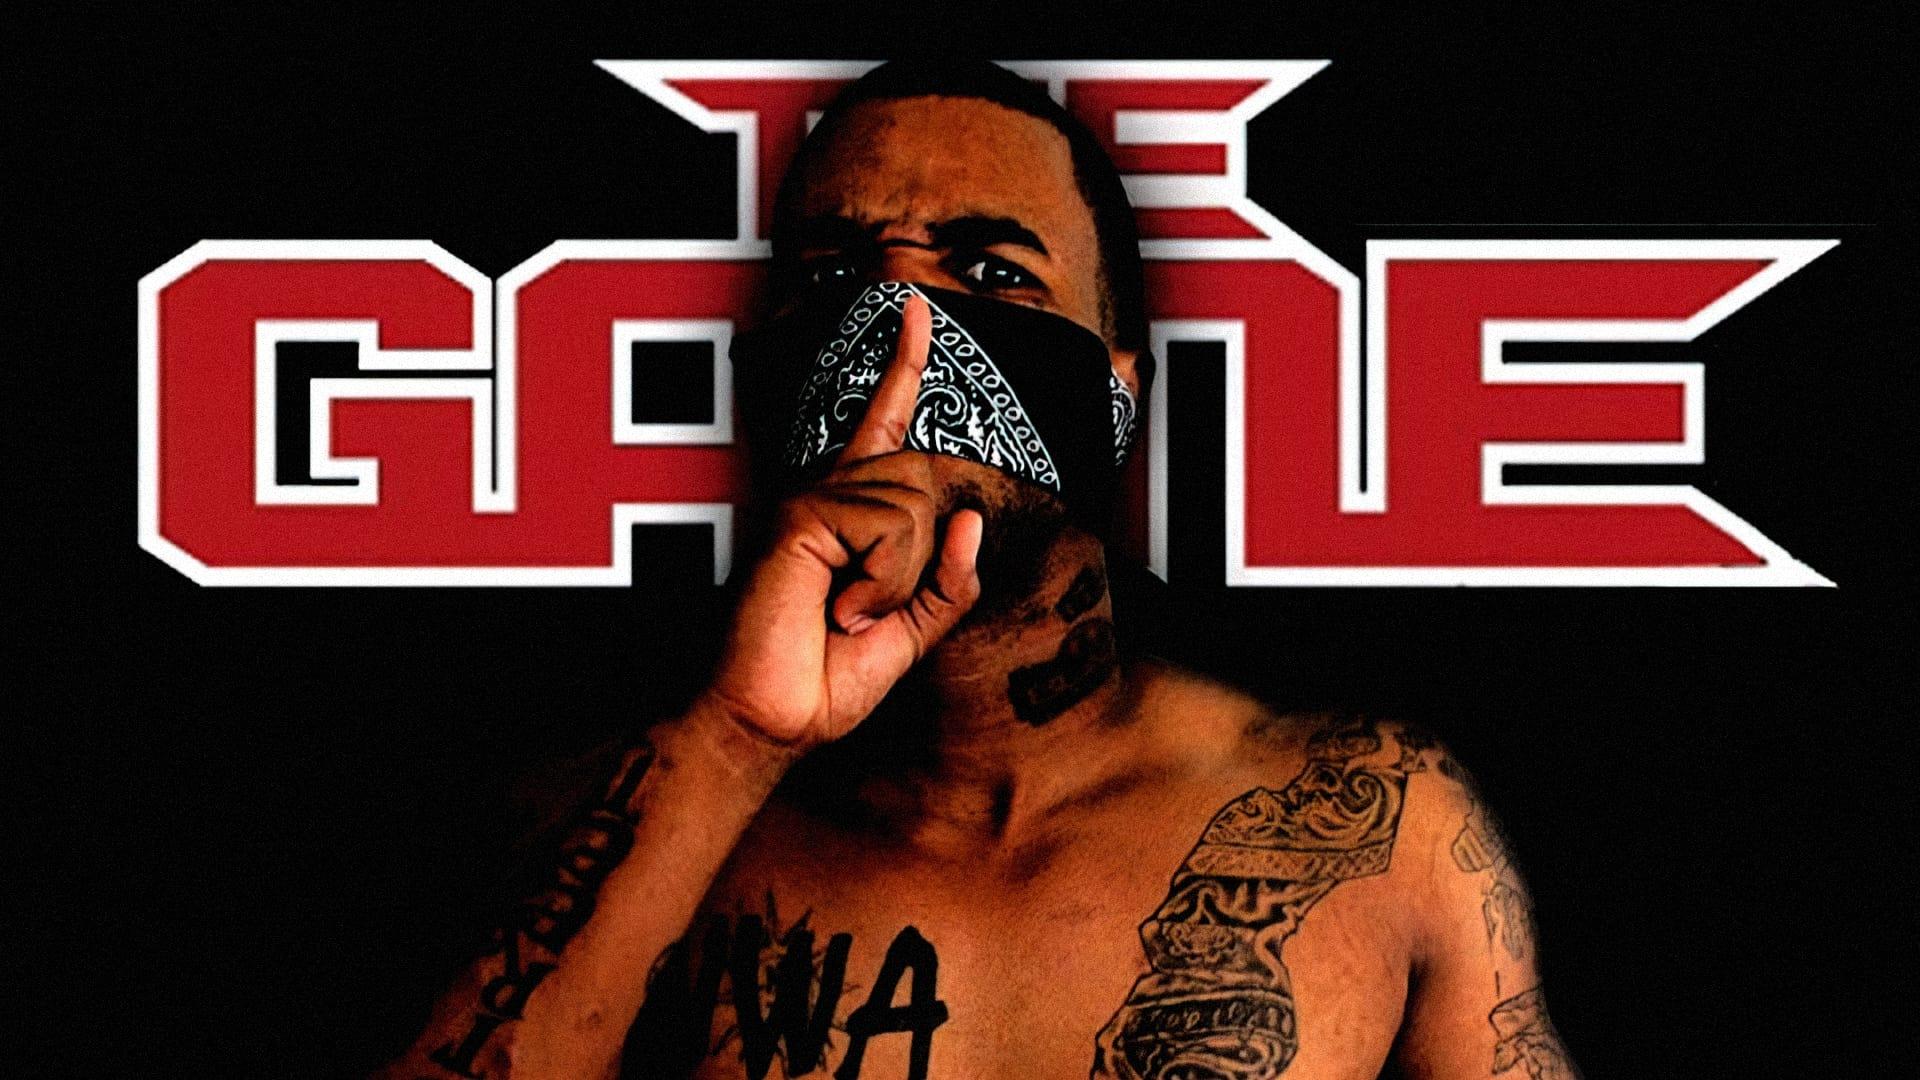 The Game: Stop Snitchin Stop Lyin backdrop